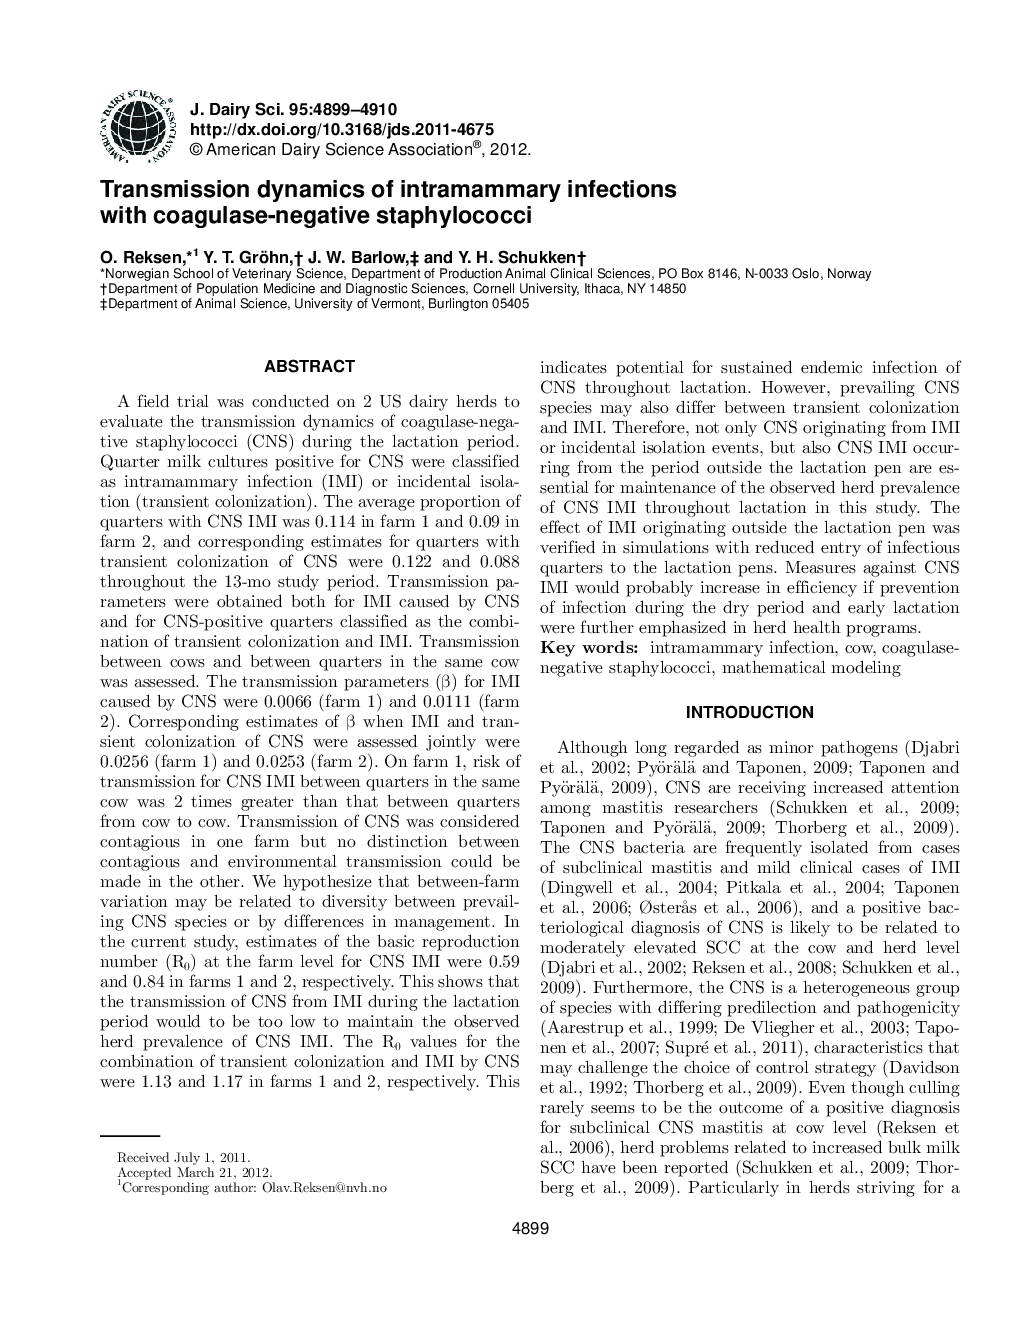 Transmission dynamics of intramammary infections with coagulase-negative staphylococci